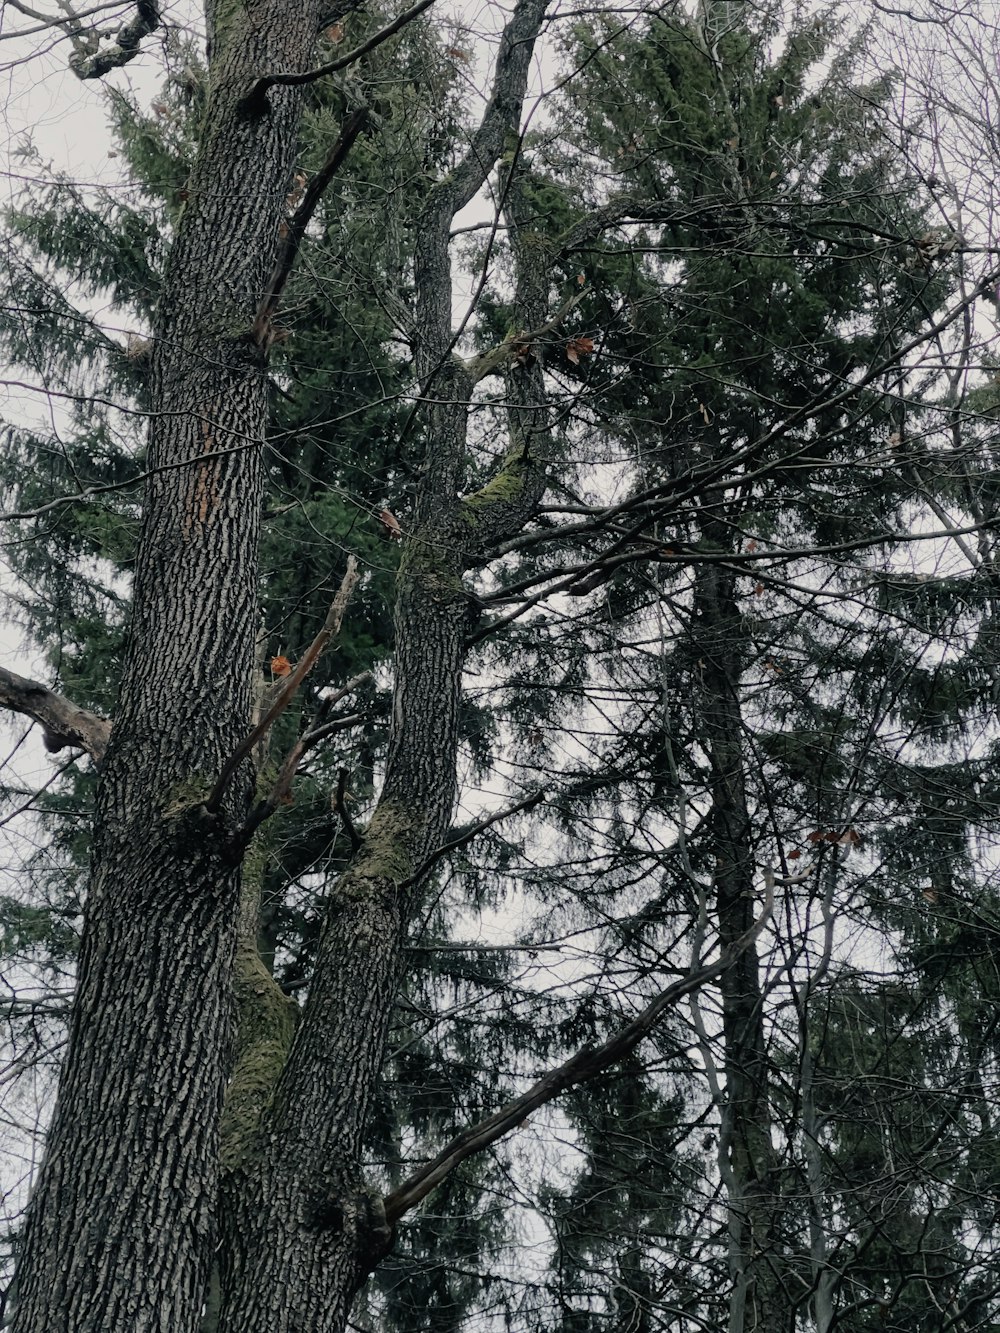 a black bear climbing up the side of a tree